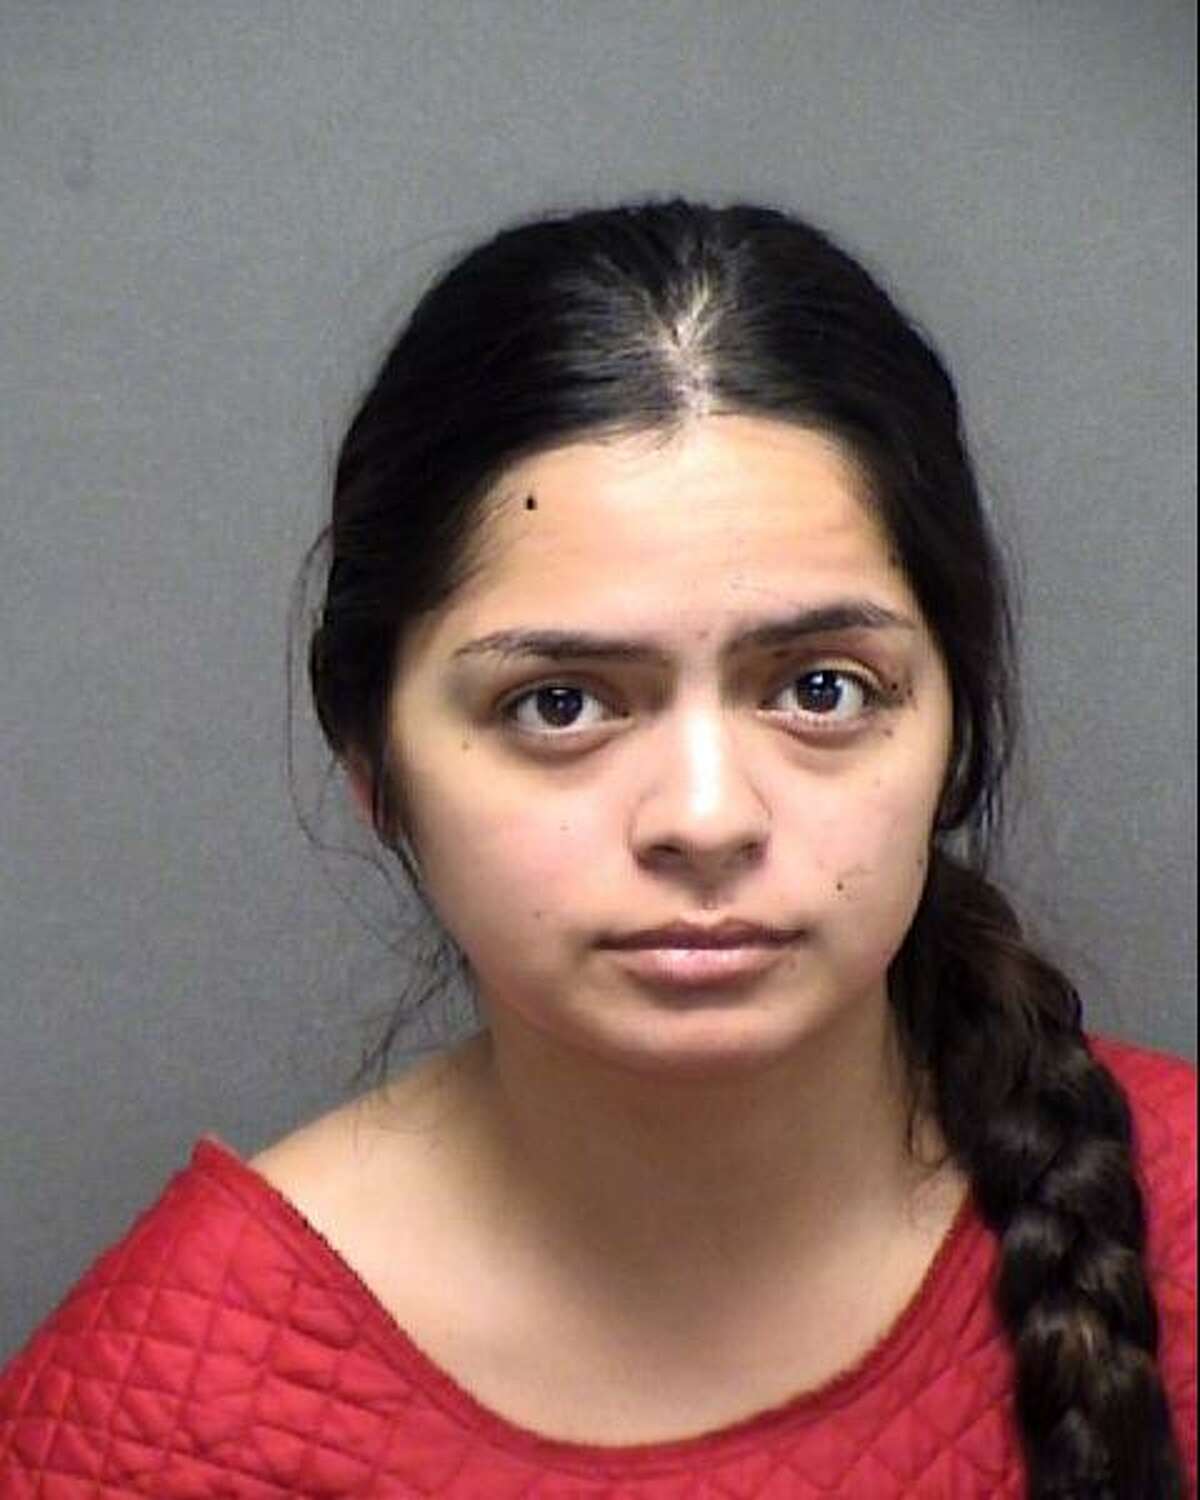 Bella Dae Garza, 23, was charged on March 22 with intoxication manslaughter and endangering a child.